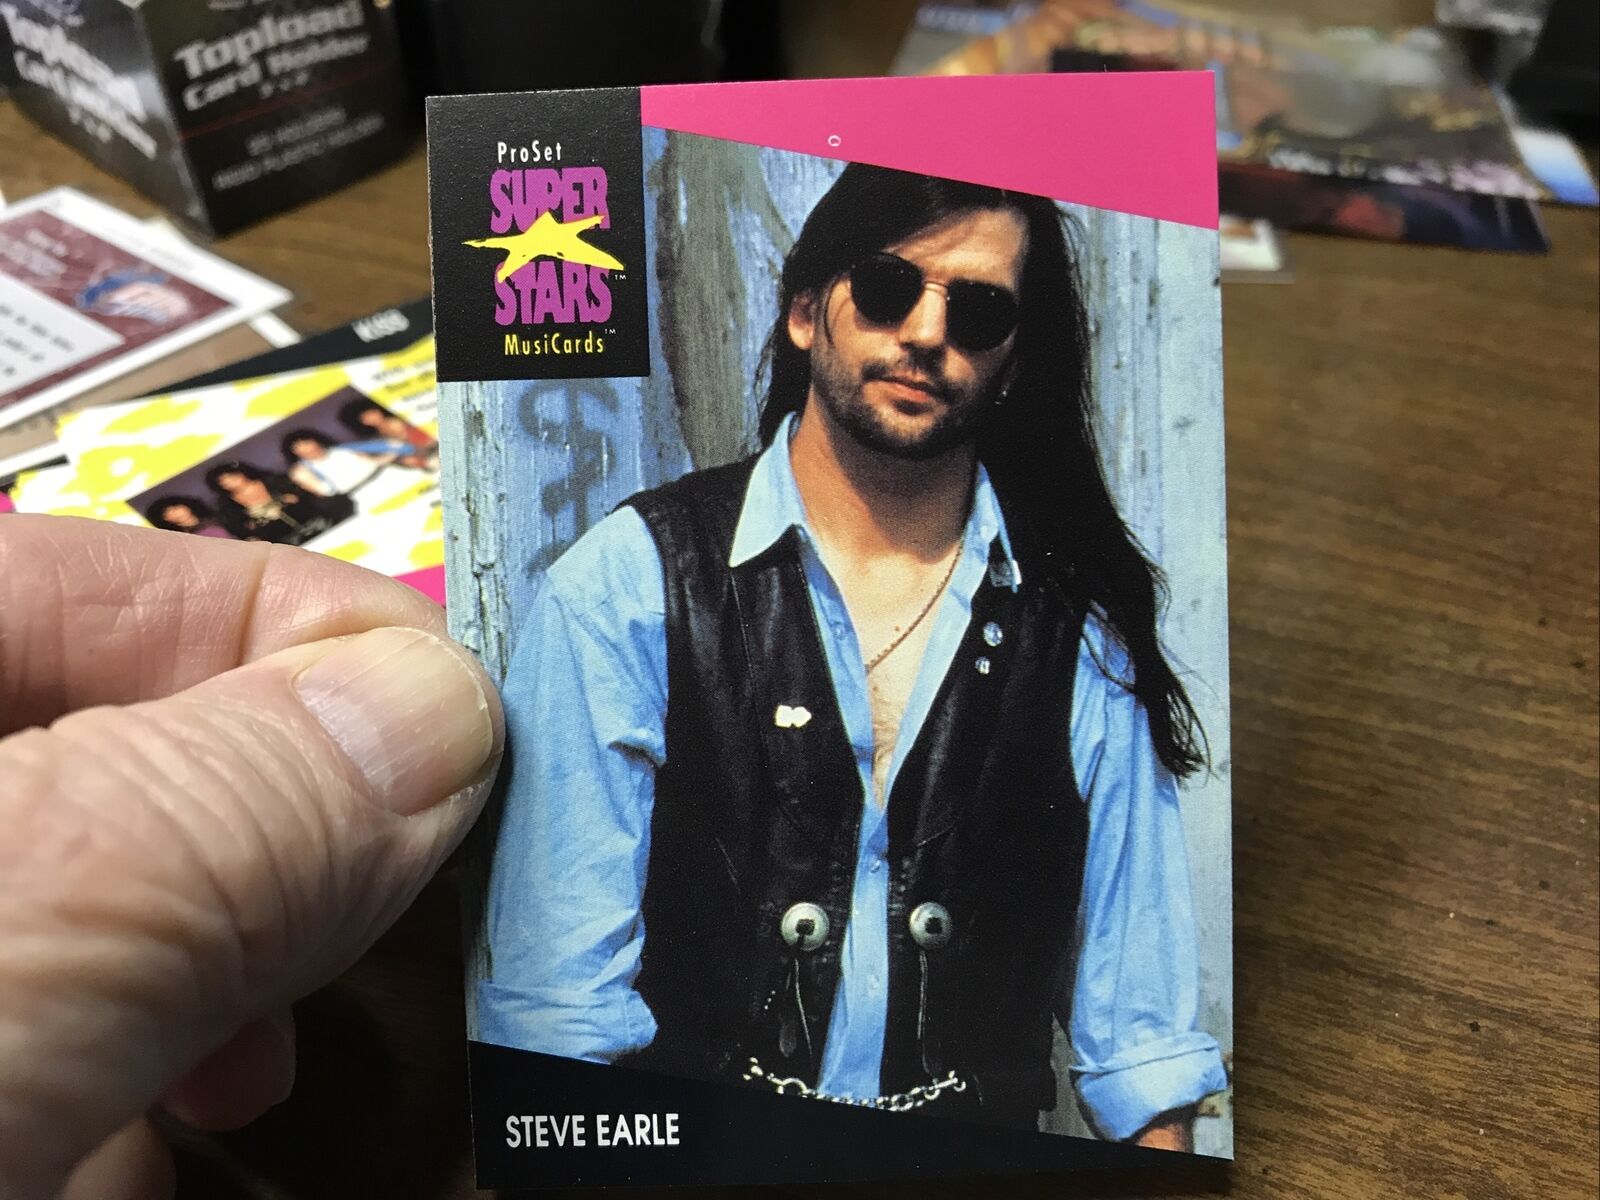 STEVE EARLE TRADING Card Max 45% OFF from SuperStars MusiCard ProSet 1991 - Max 68% OFF